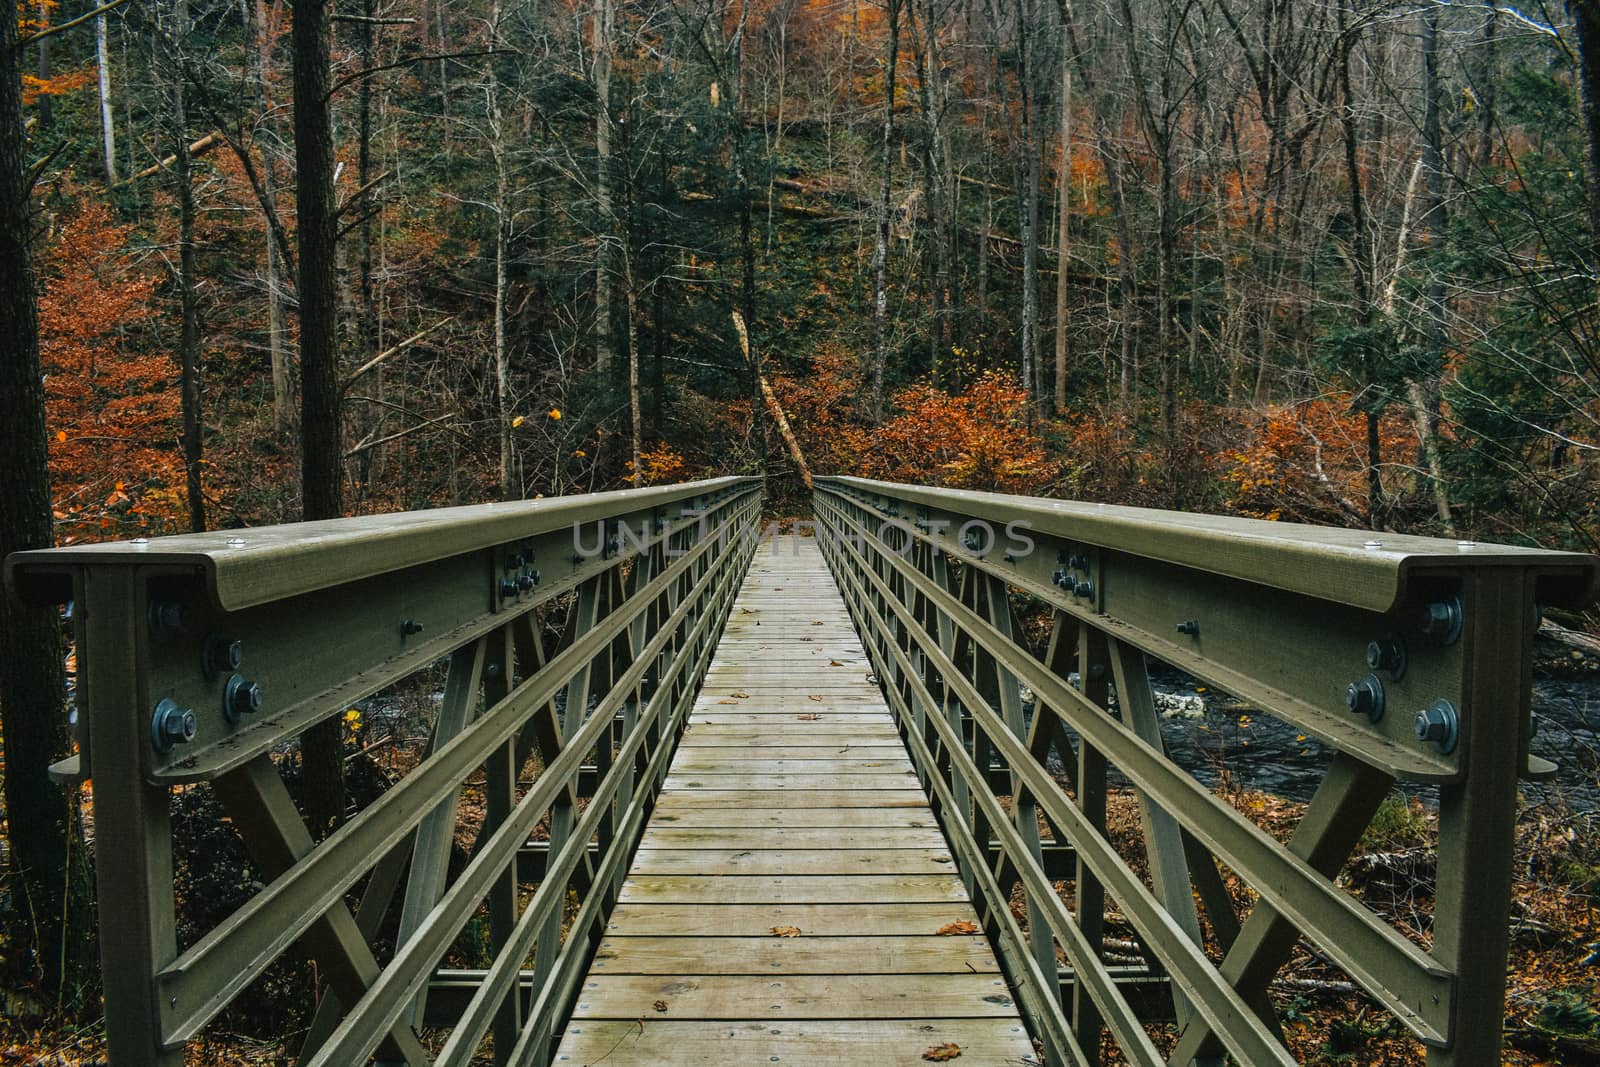 A Steel and Wood Bridge in a Dead Autumn Forest